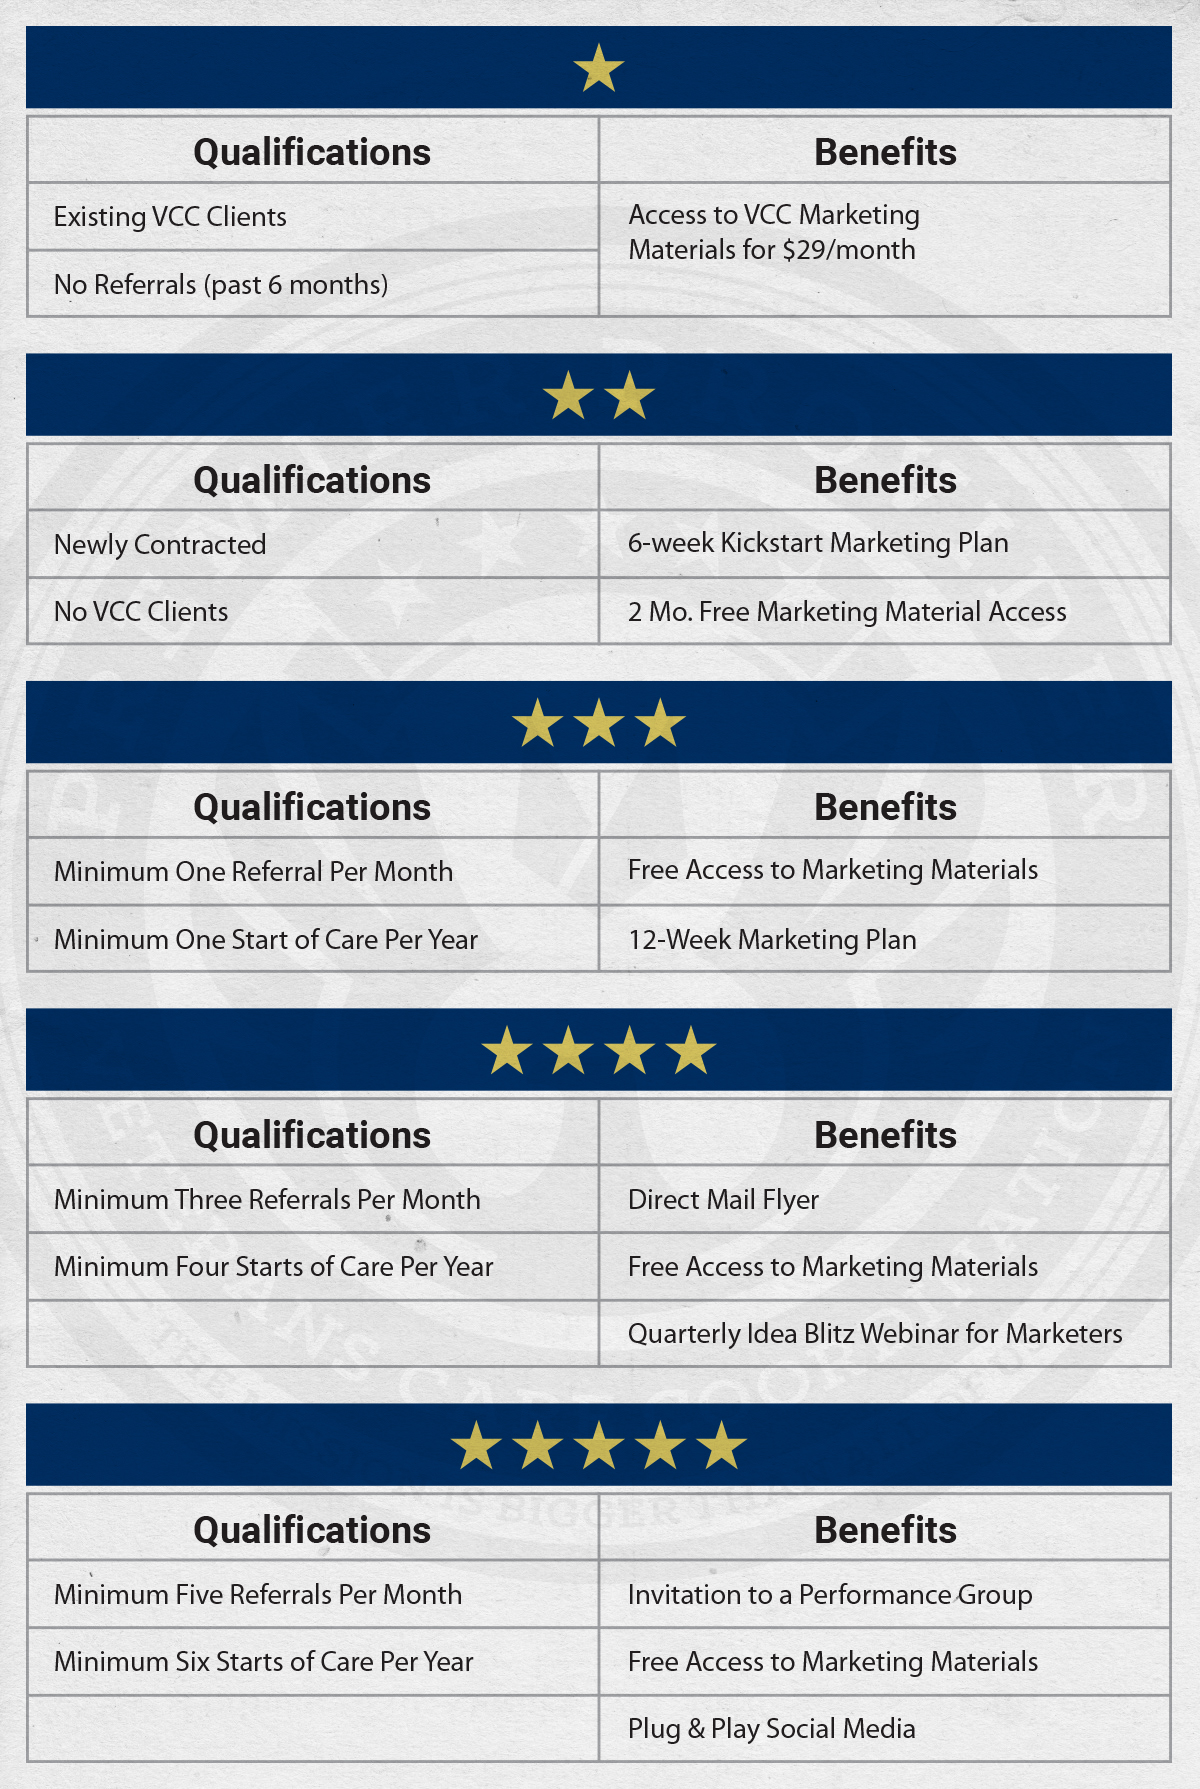 Qualifications and Benefits for each level of the VCC 5-Star Program